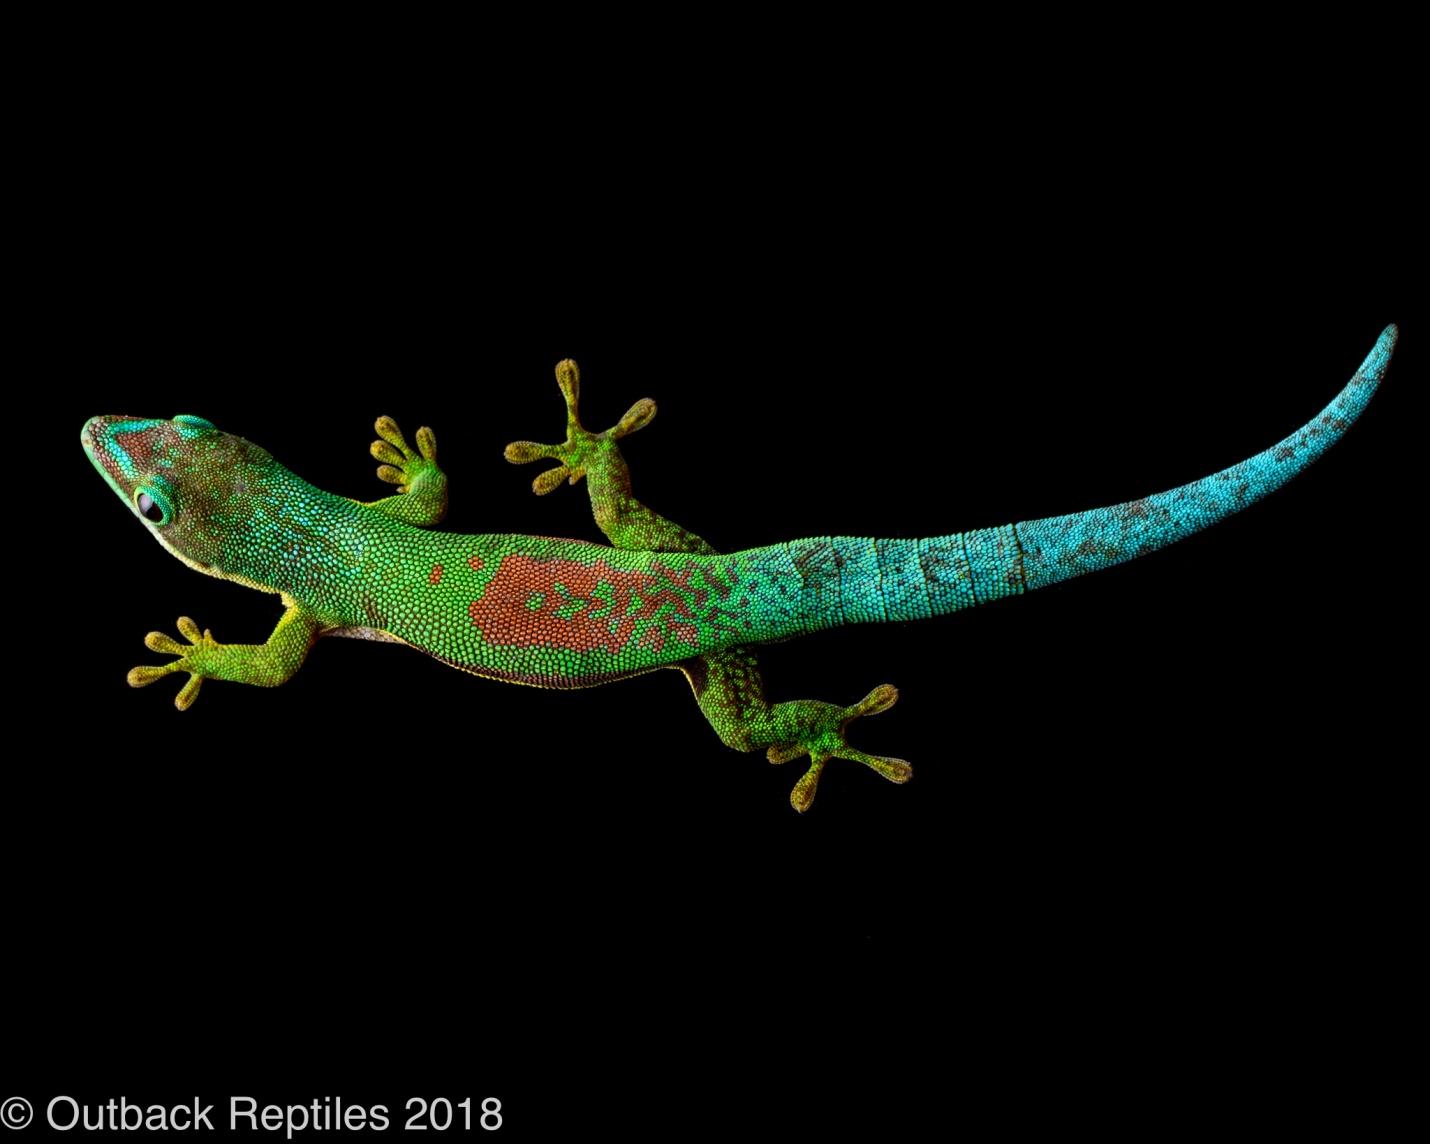 Image result for lined day gecko